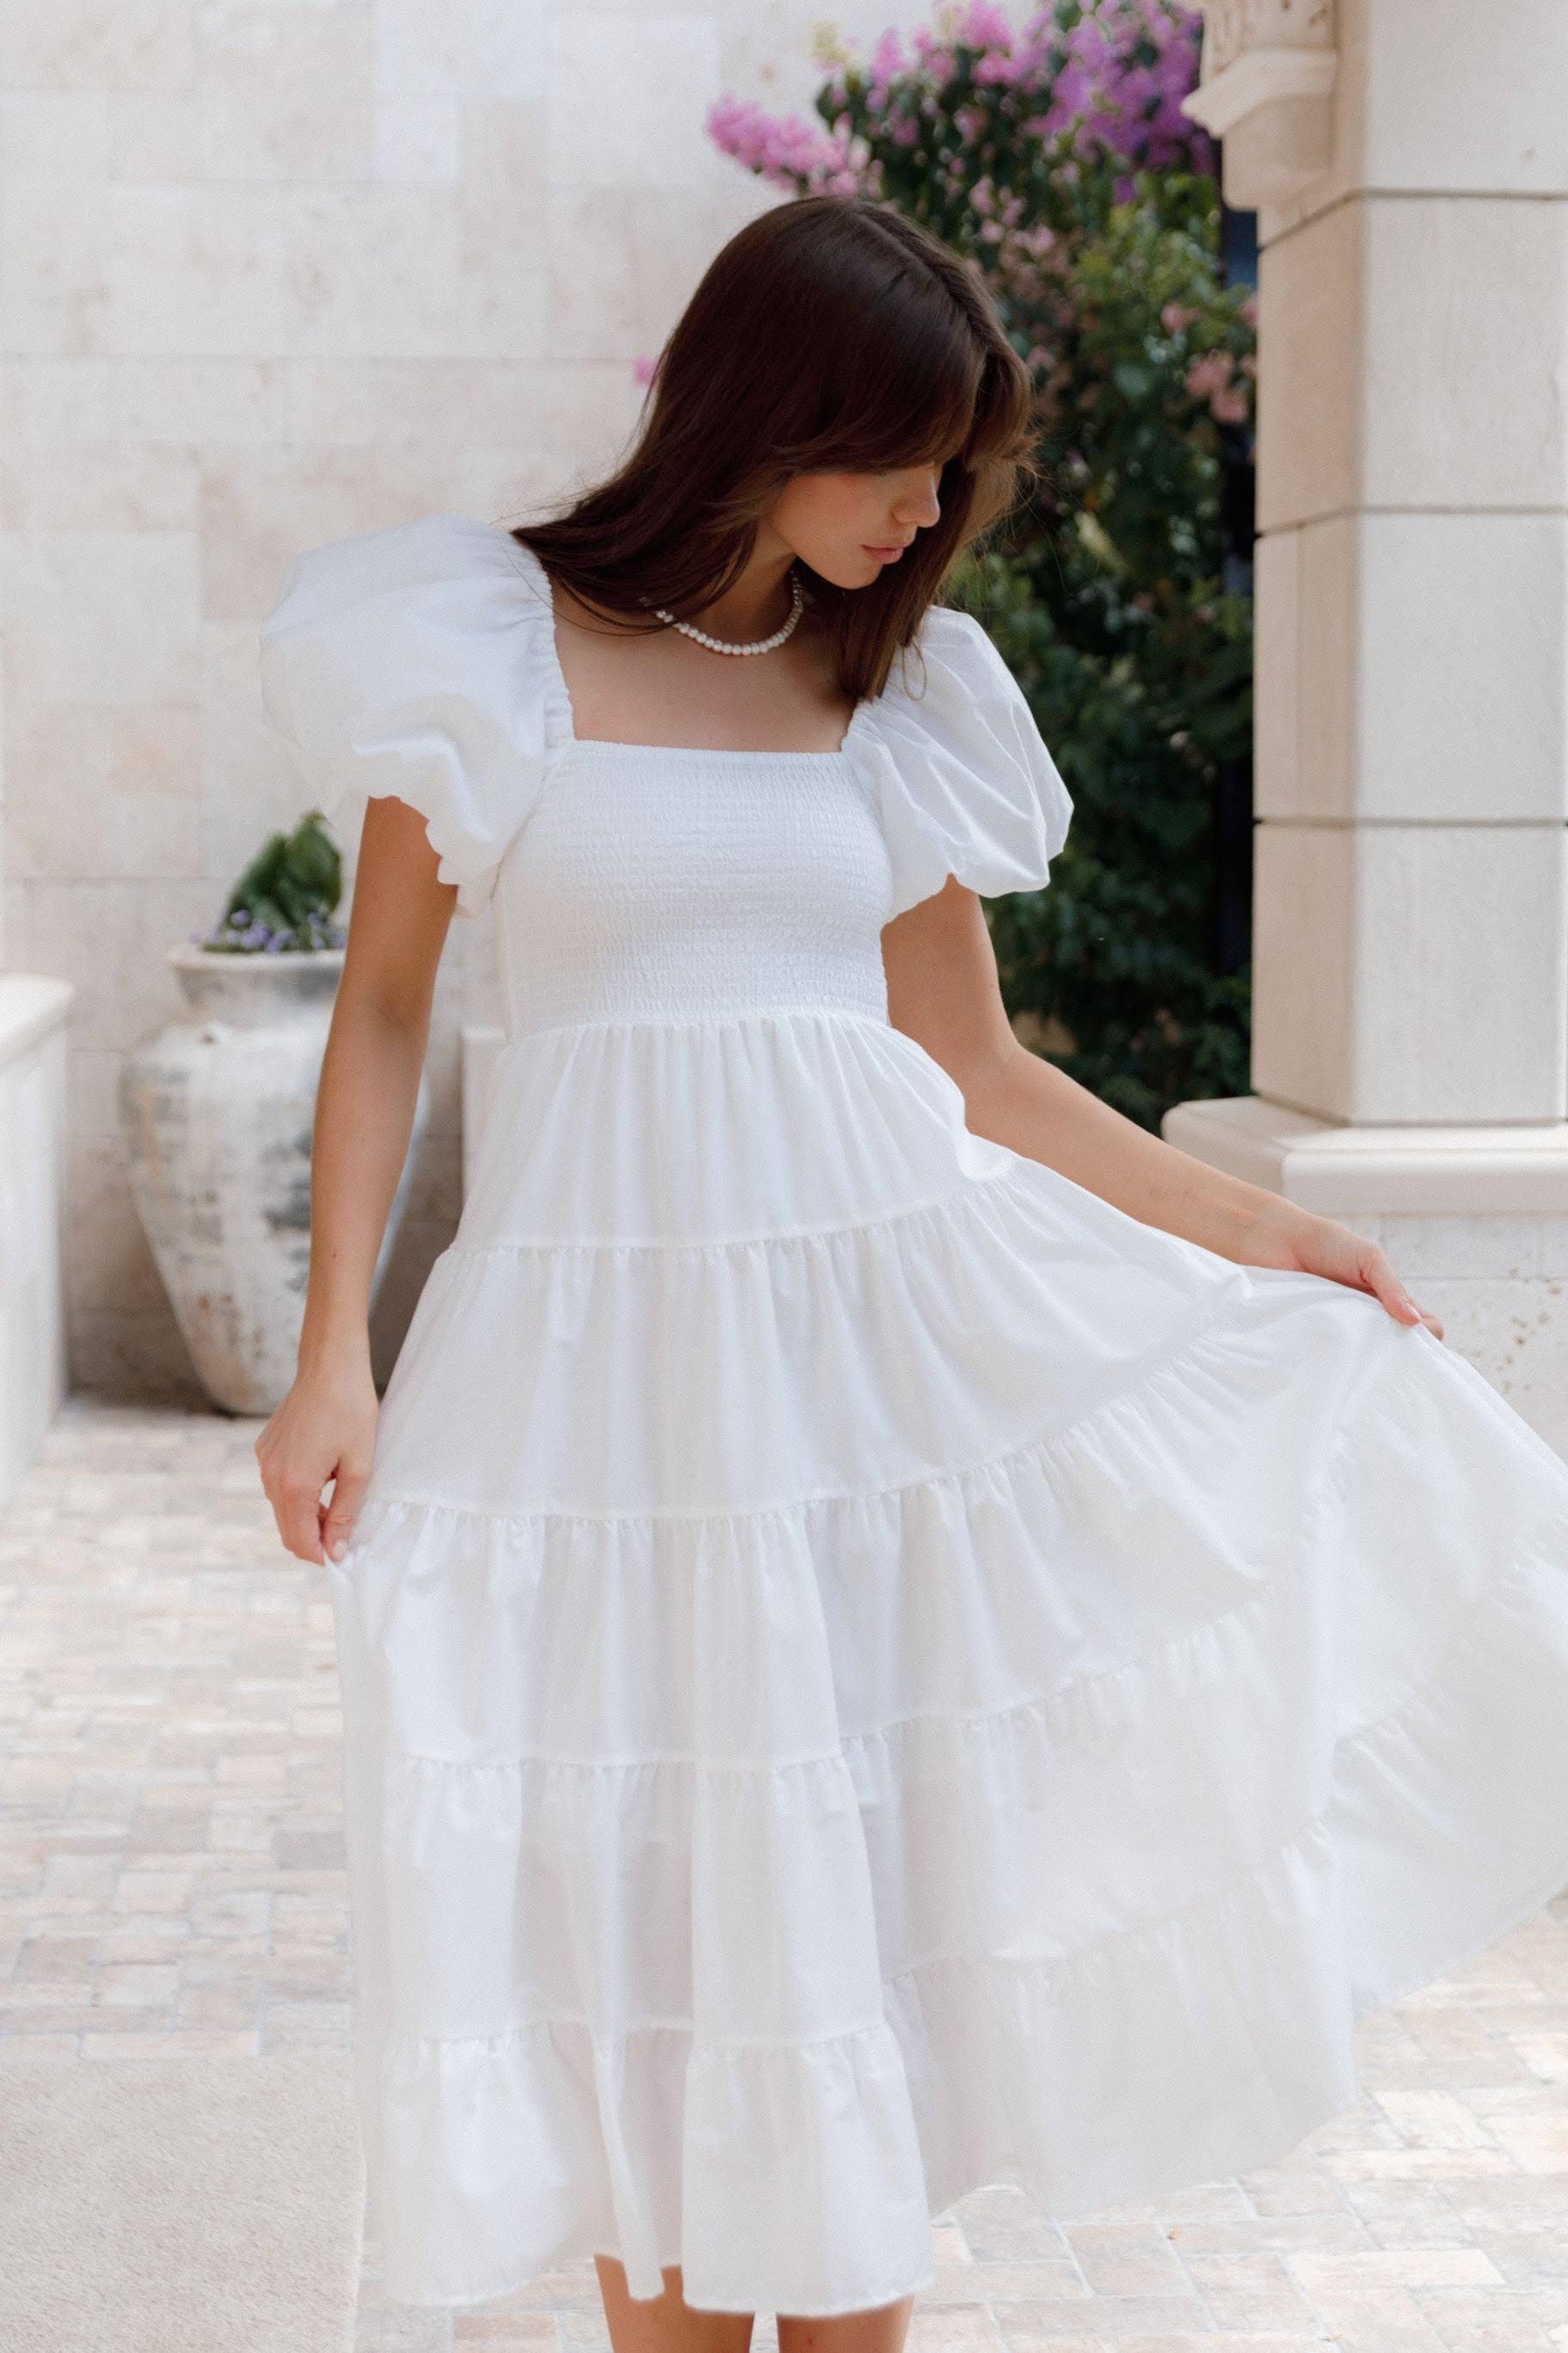 Elegant White Flowy Dress with Puff Sleeves | Image